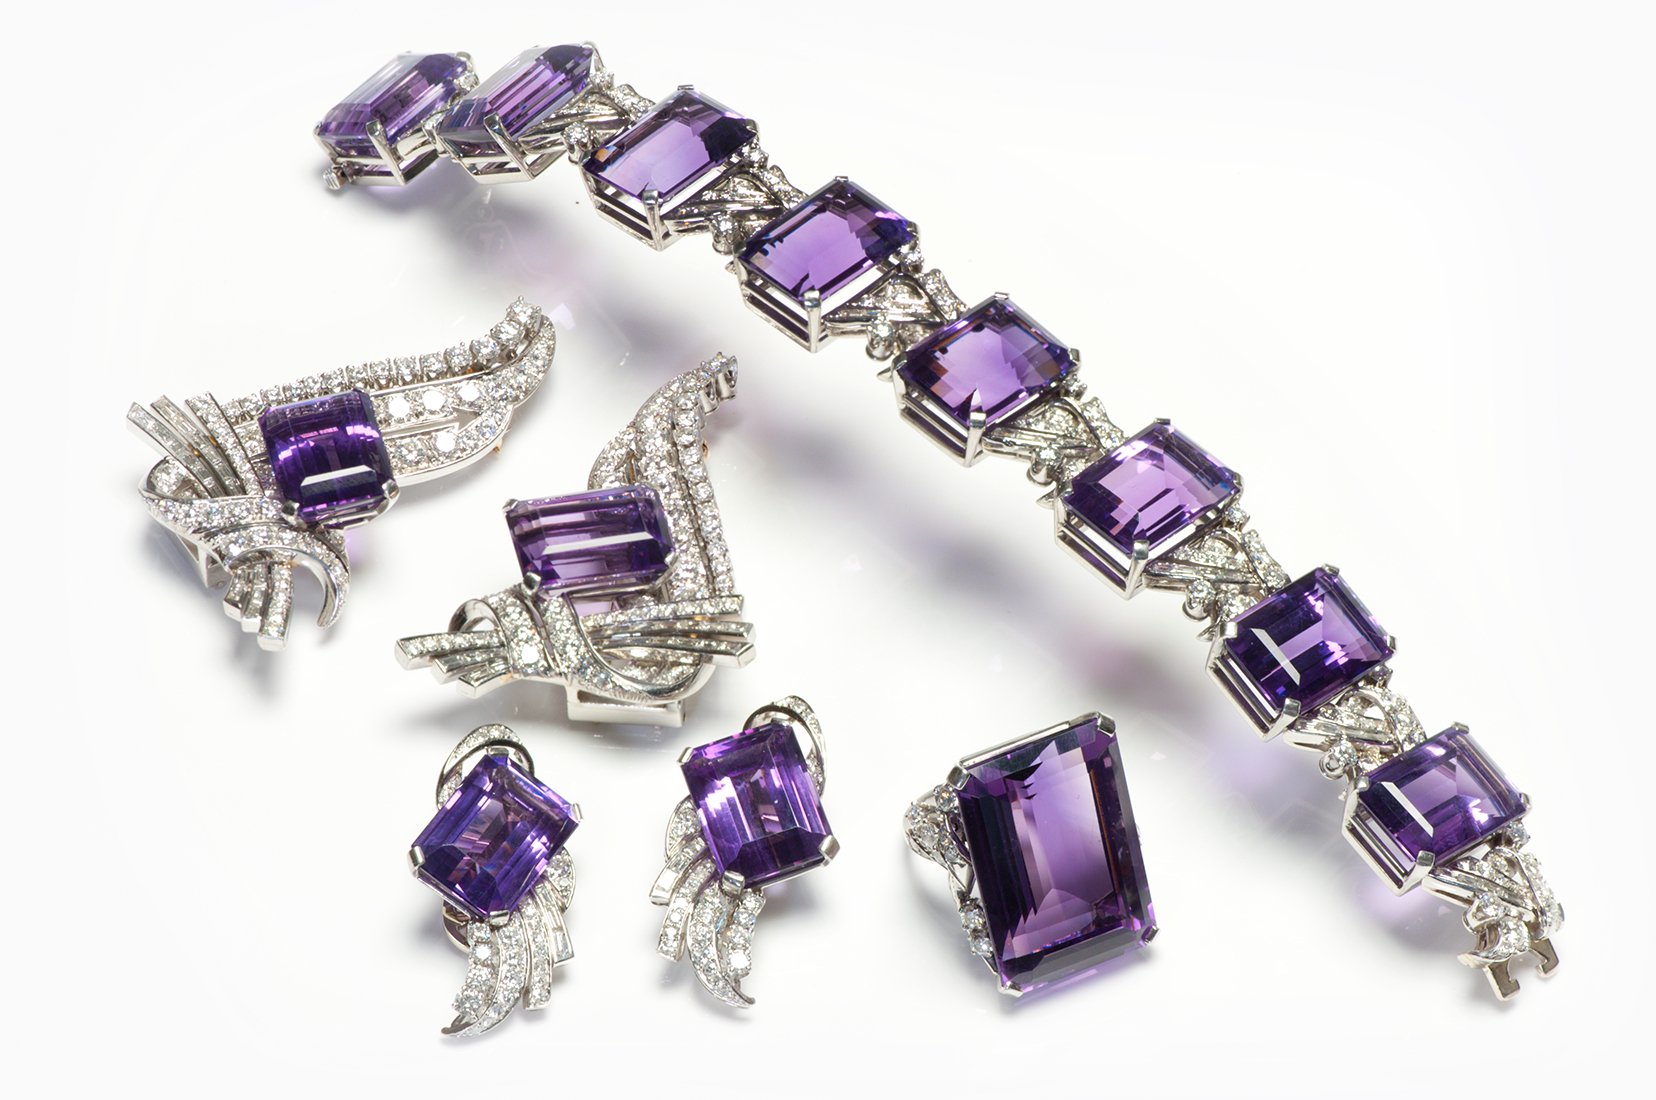 Exquisite Amethyst Diamond Bracelet Clips Ring Earrings Set - DSF Antique Jewelry